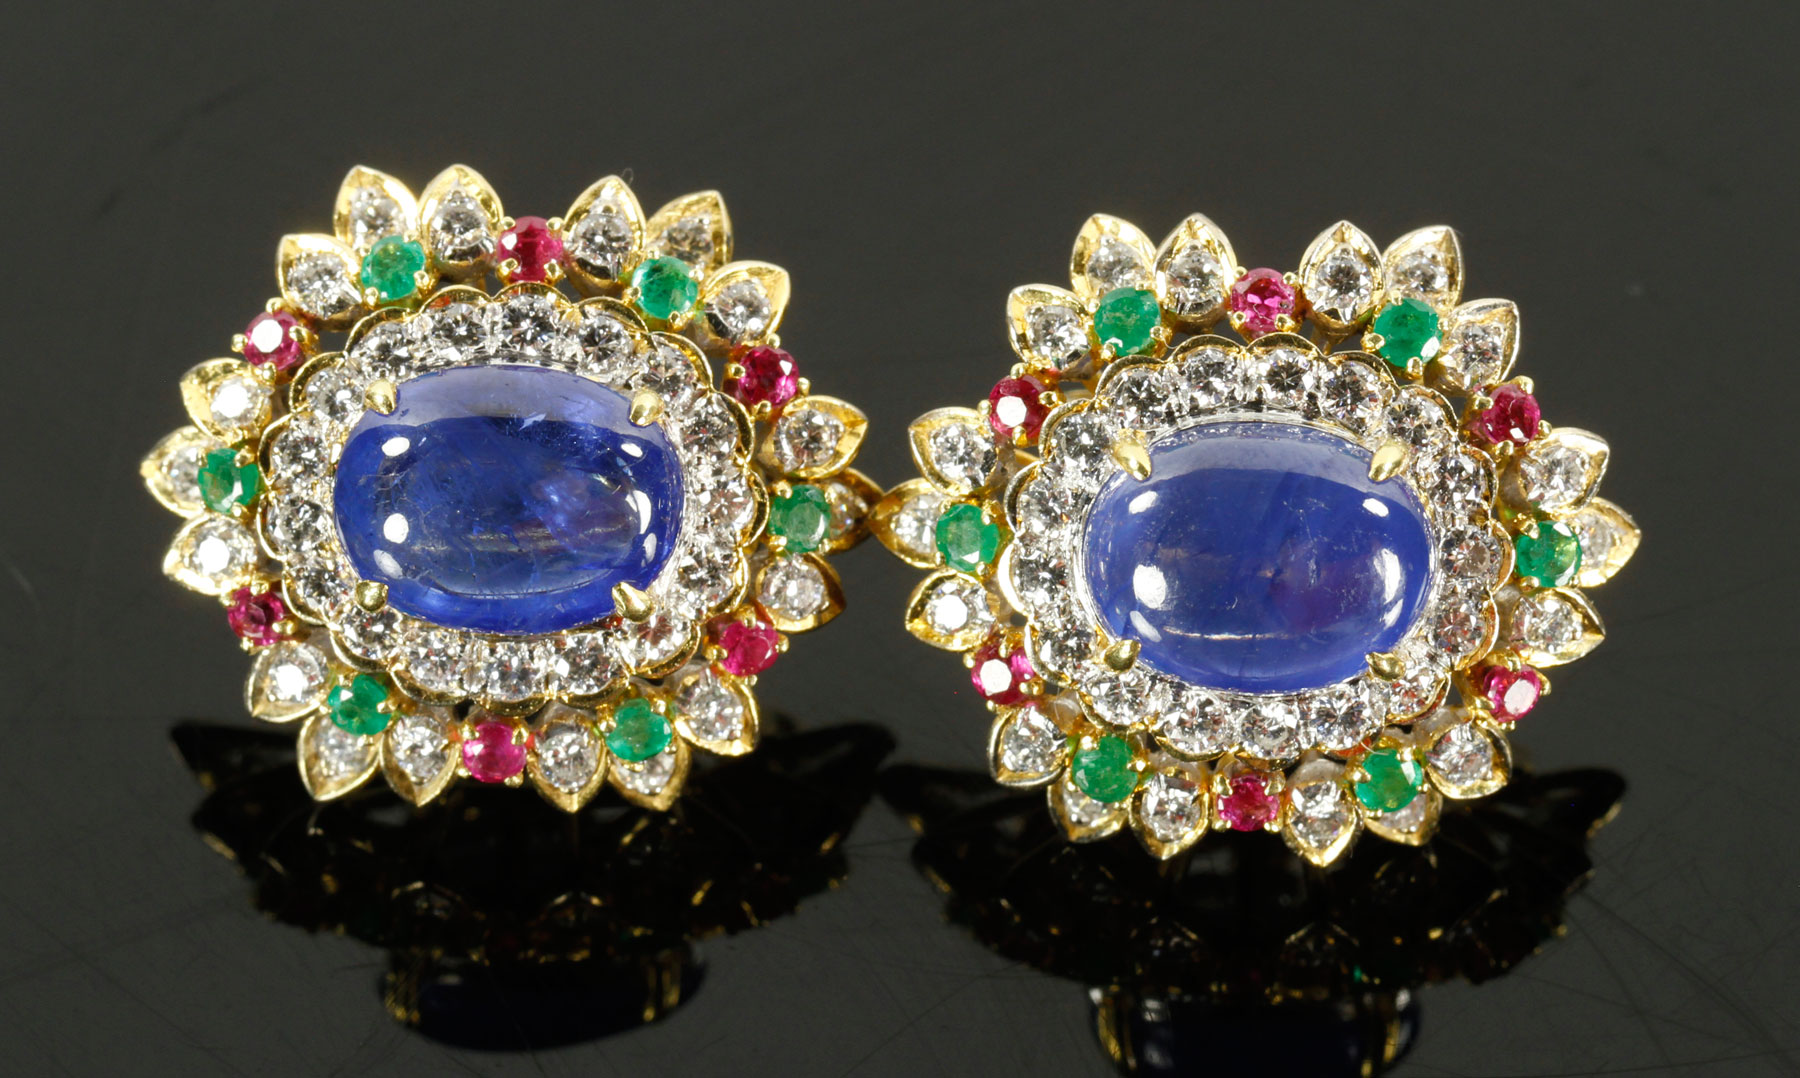 18K yellow gold earrings, with cabochon sapphires, diamonds, rubies, and emeralds